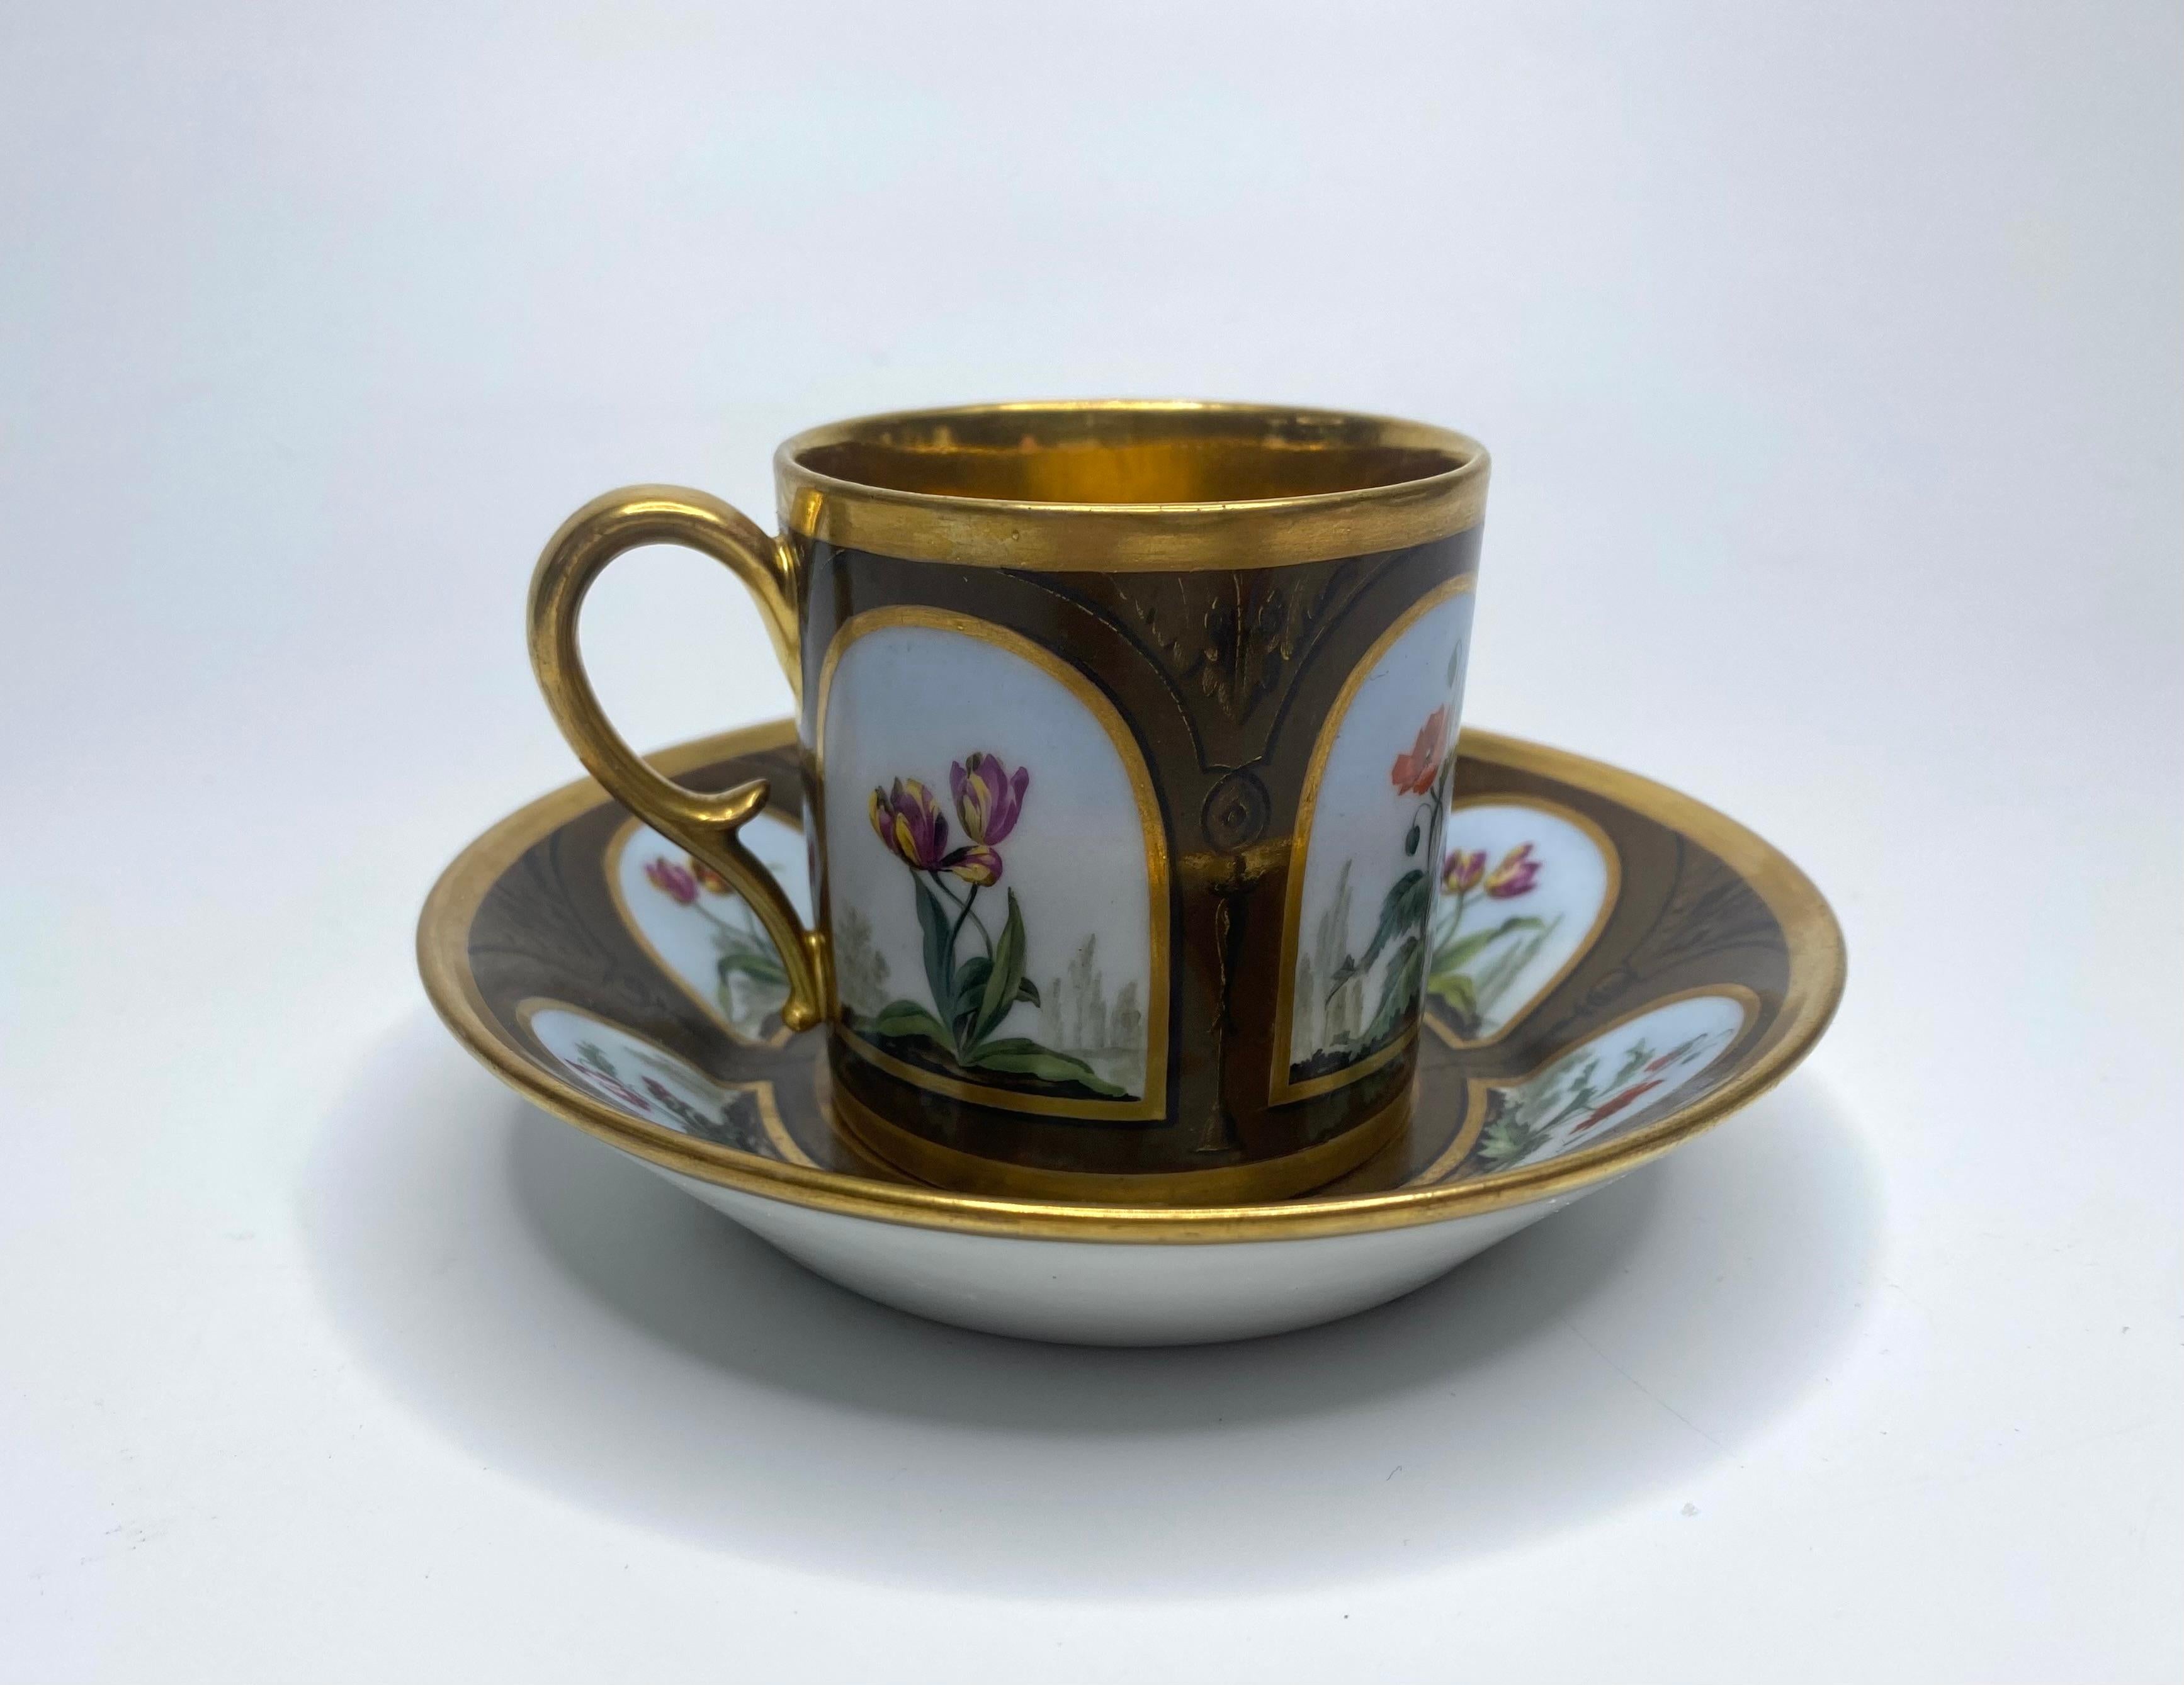 Fired Paris porcelain coffee can & saucer, c. 1810. For Sale